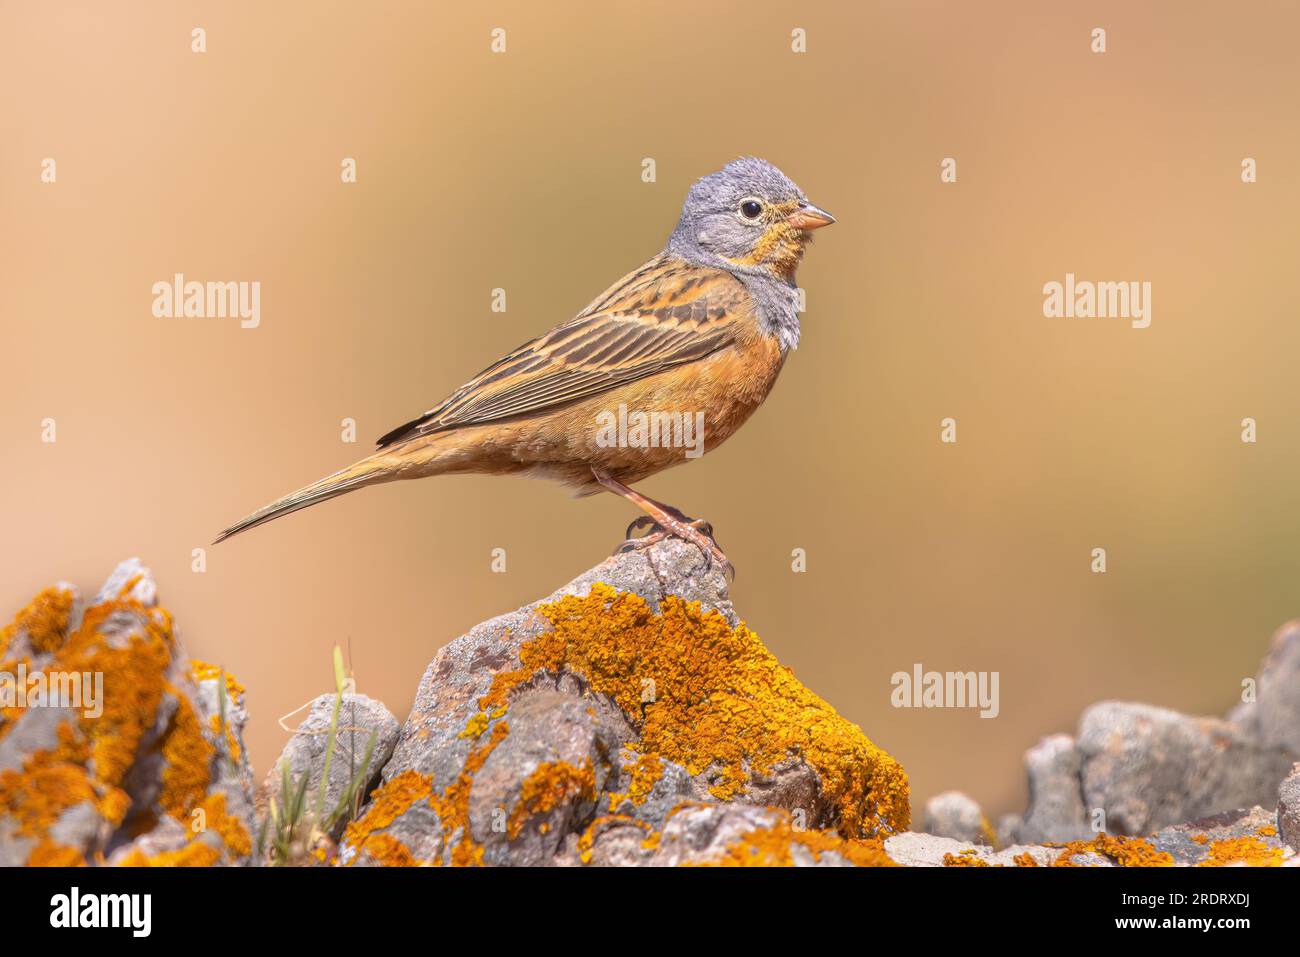 Cretzschmar's bunting (Emberiza caesia) singing from a perch on rock on Lesbos island, Greece. Wildlife scene of nature in Europe. Stock Photo